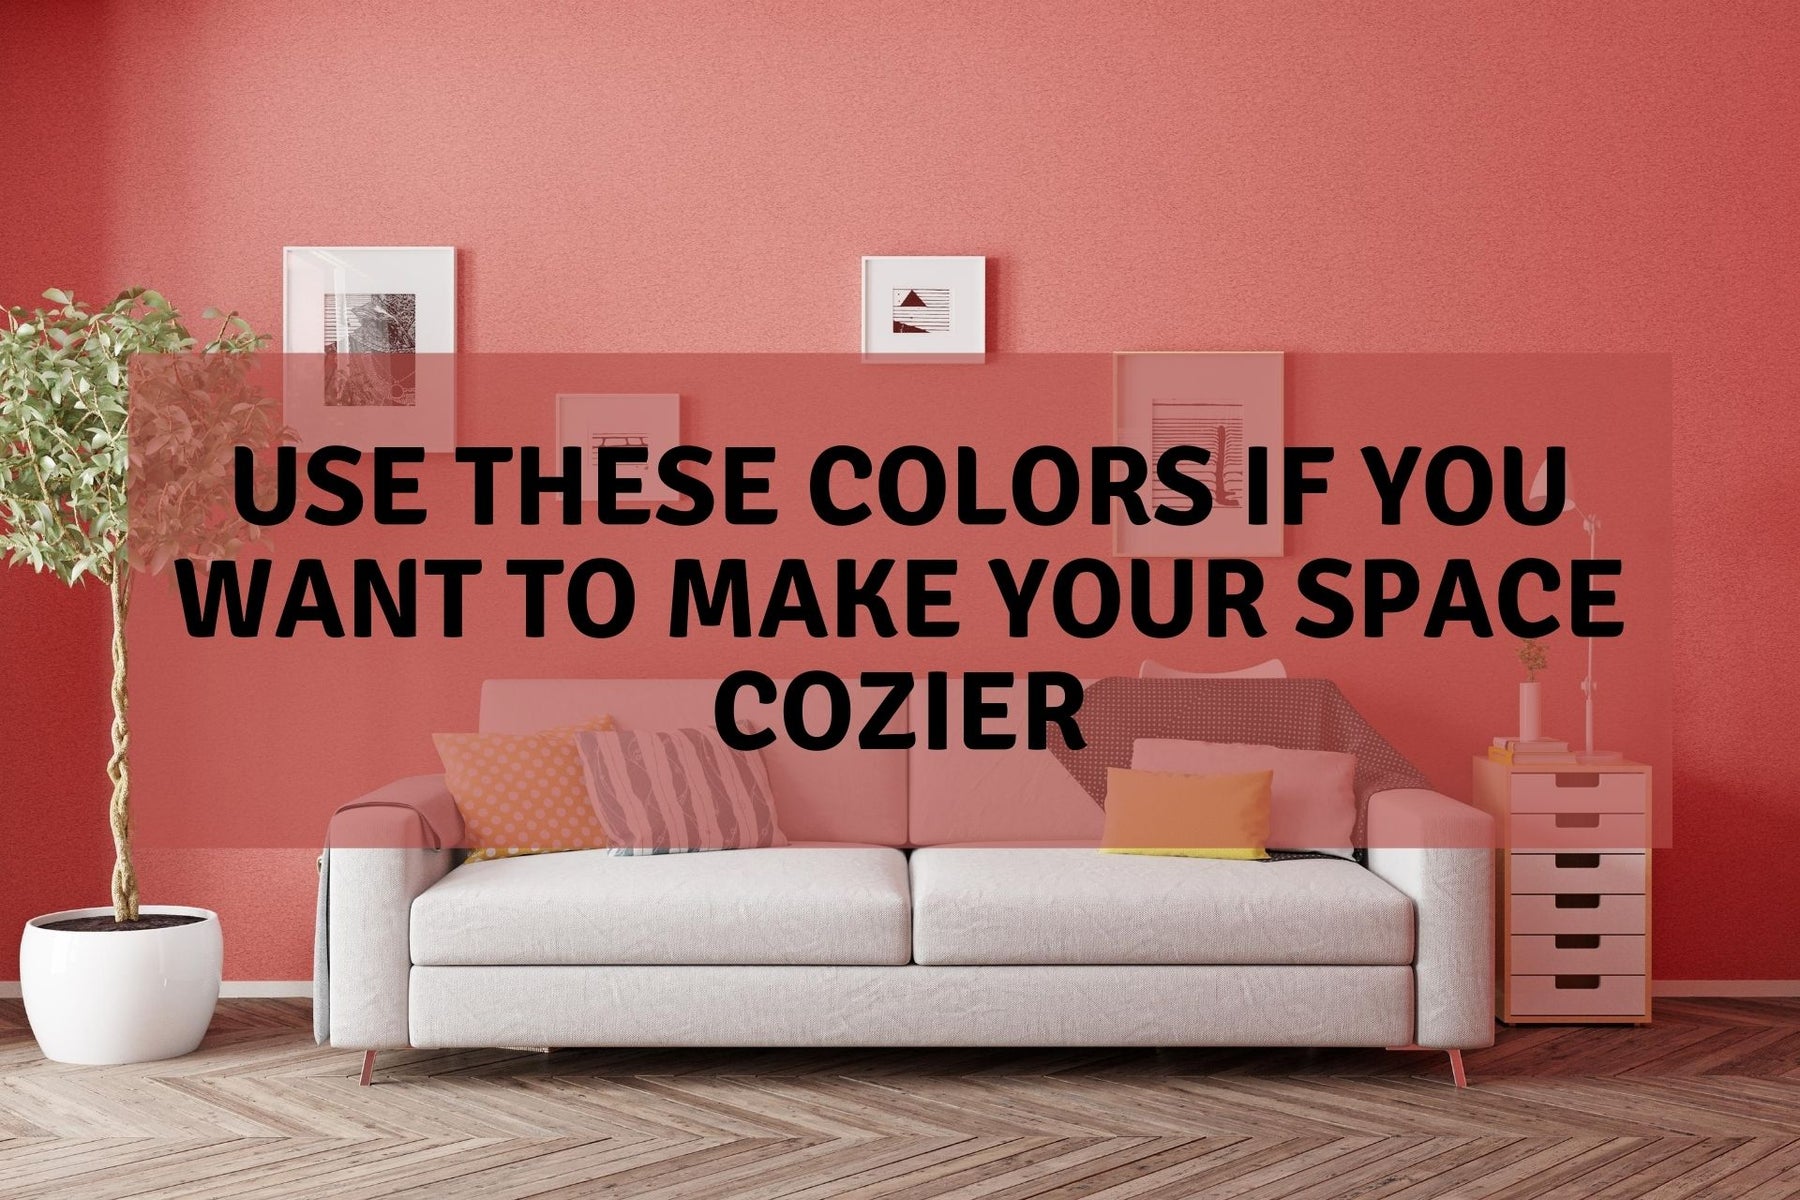 Use These Colors If You Want To Make Your Space Cozier